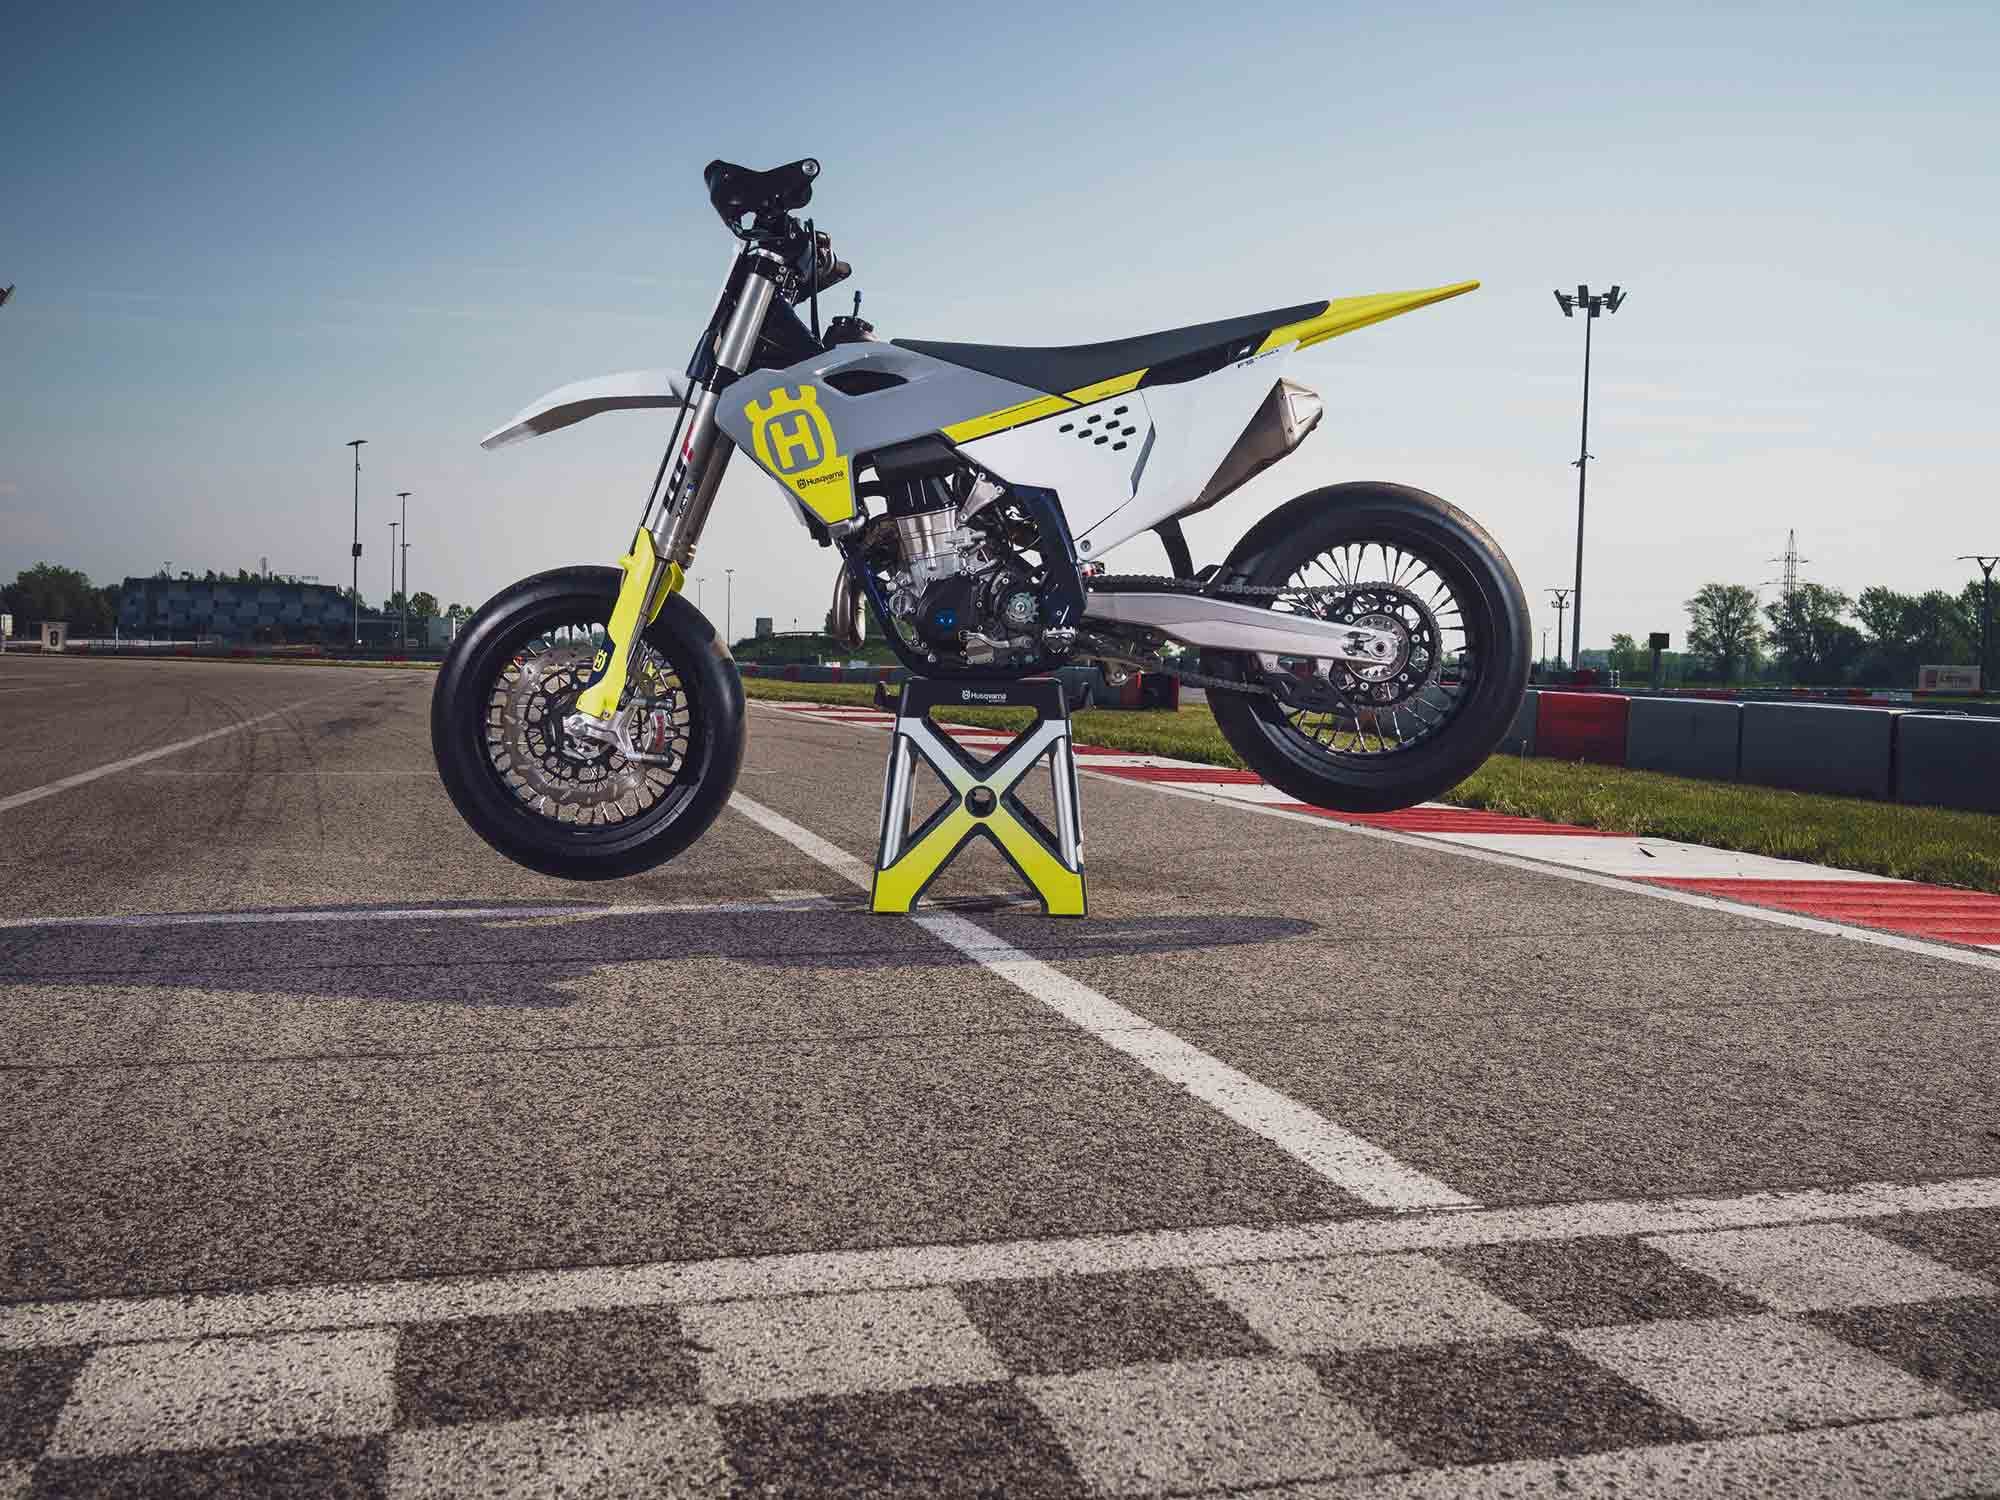 The 2023 Husqvarna FS 450 is now available from authorized Husqvarna dealers